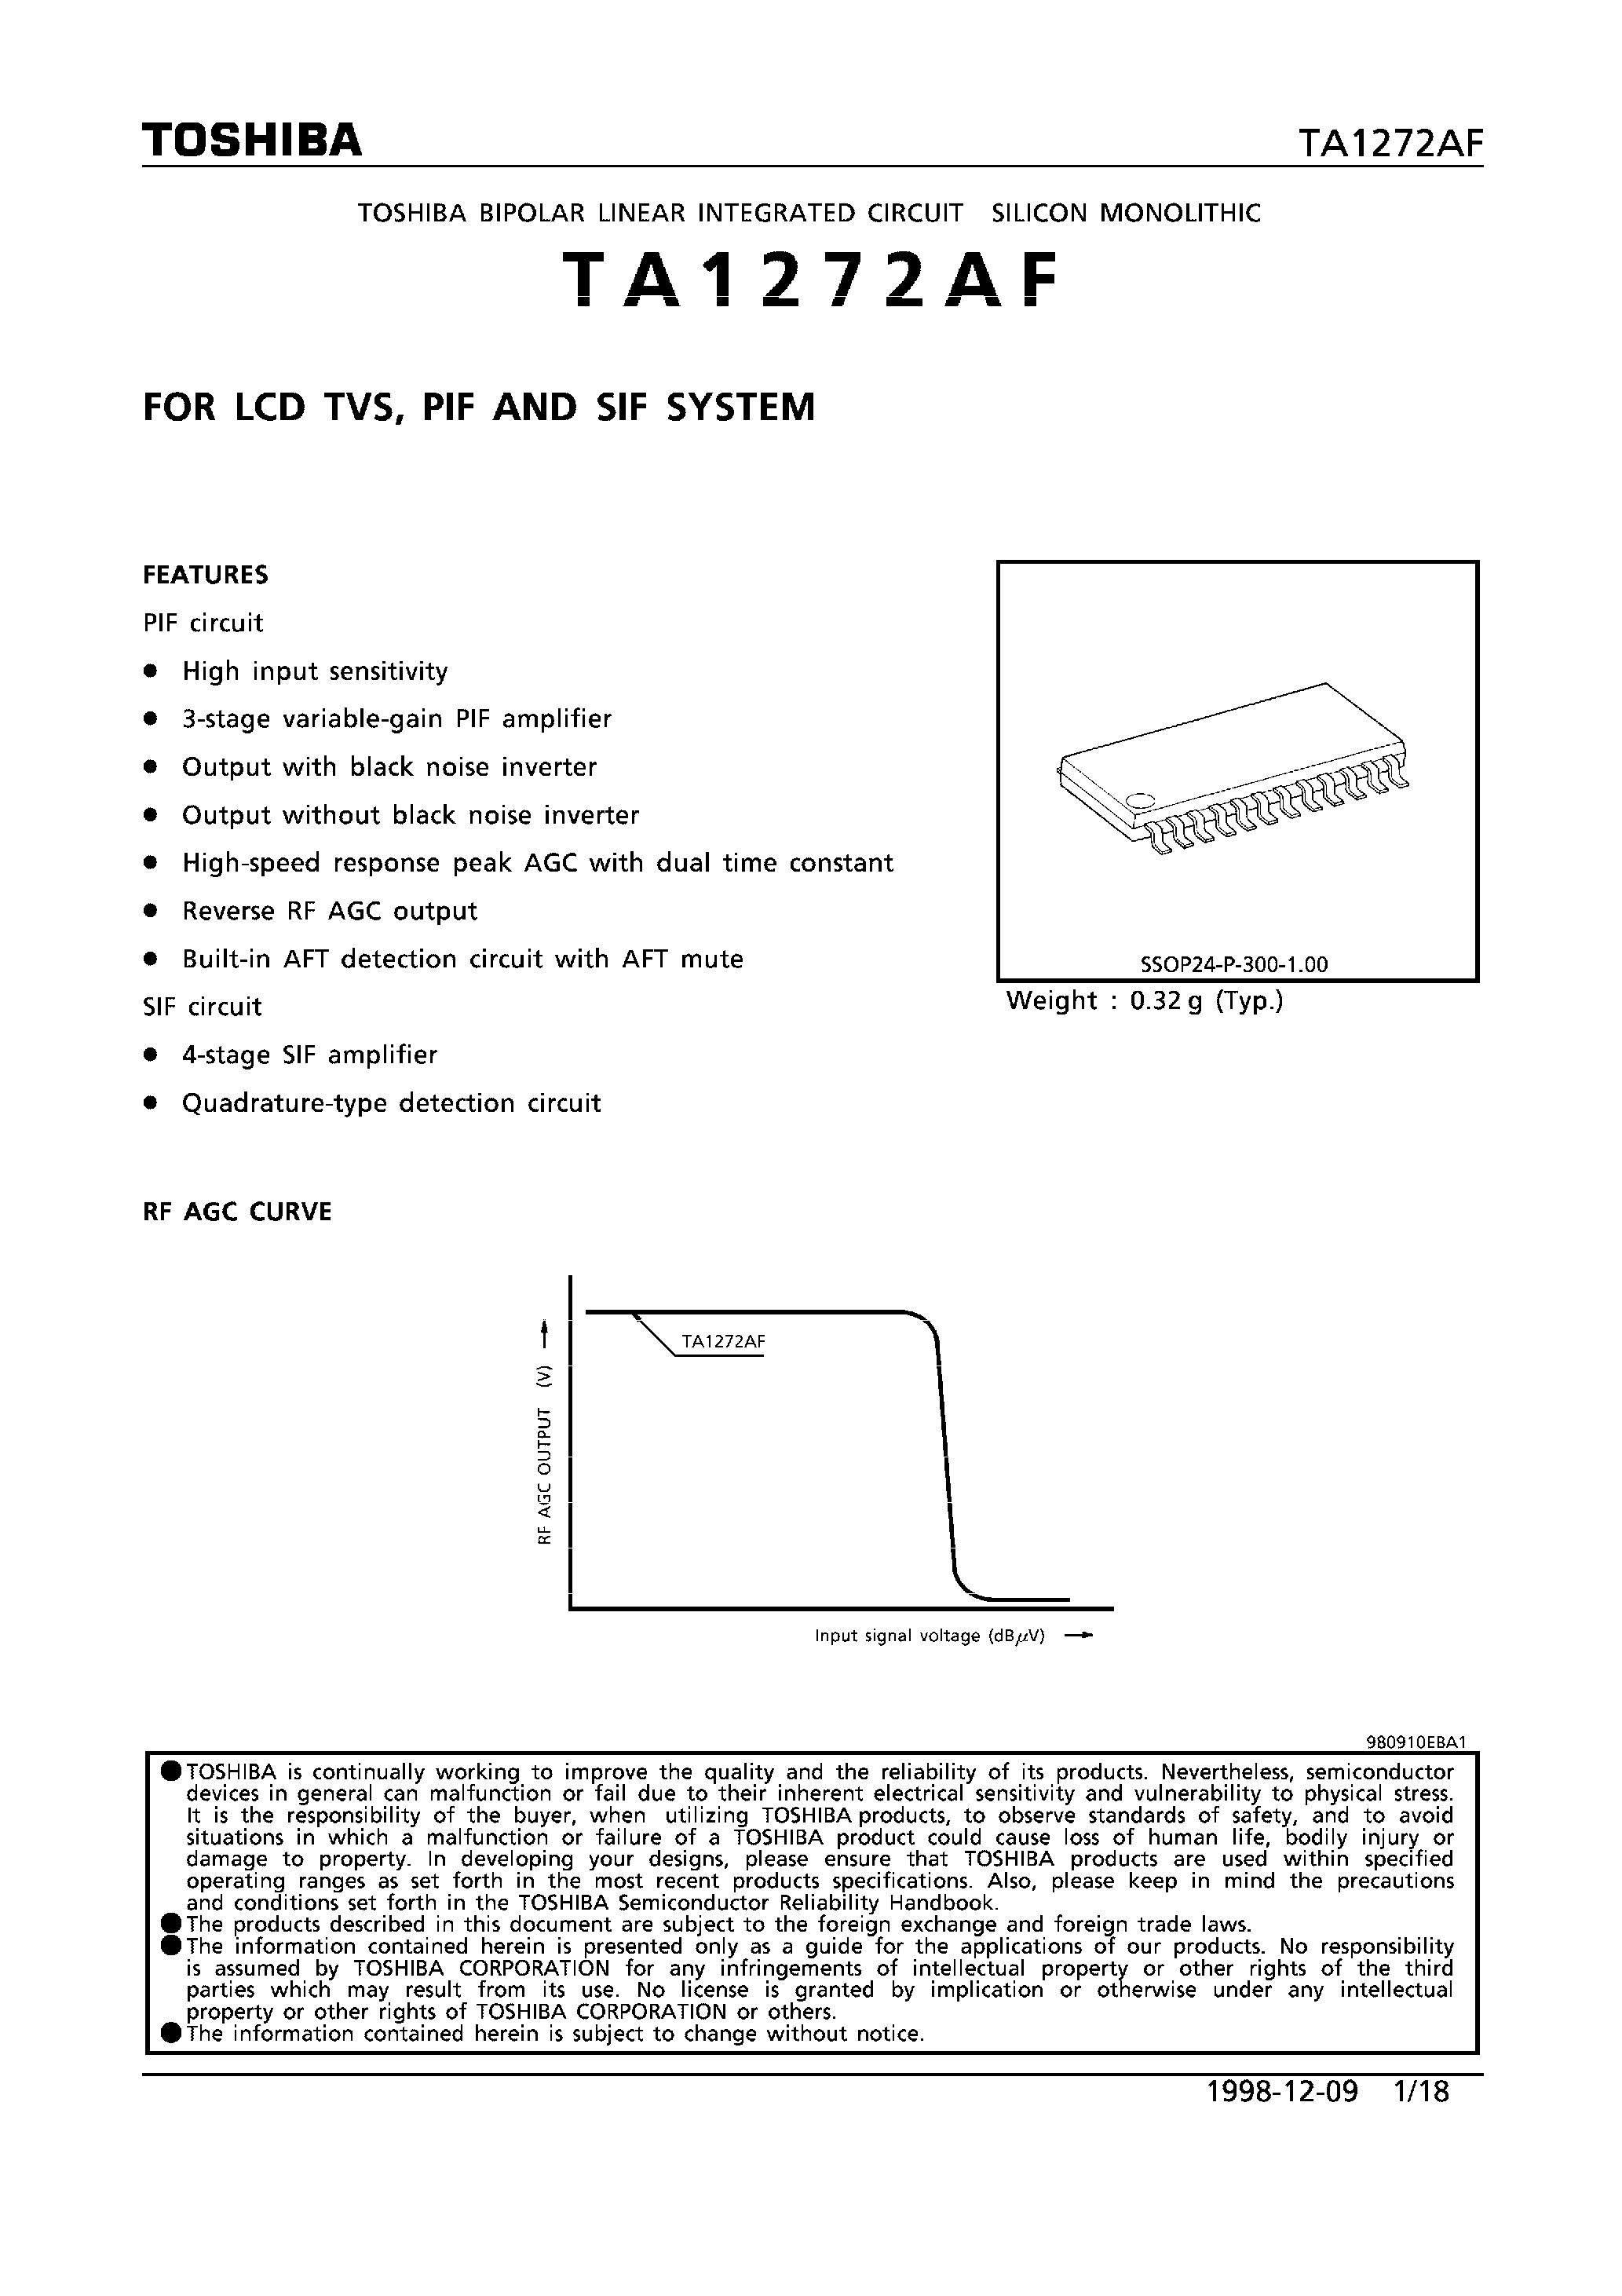 Datasheet TA1272AF - FOR LCD TVS / PIF AND SIF SYSTEM page 1